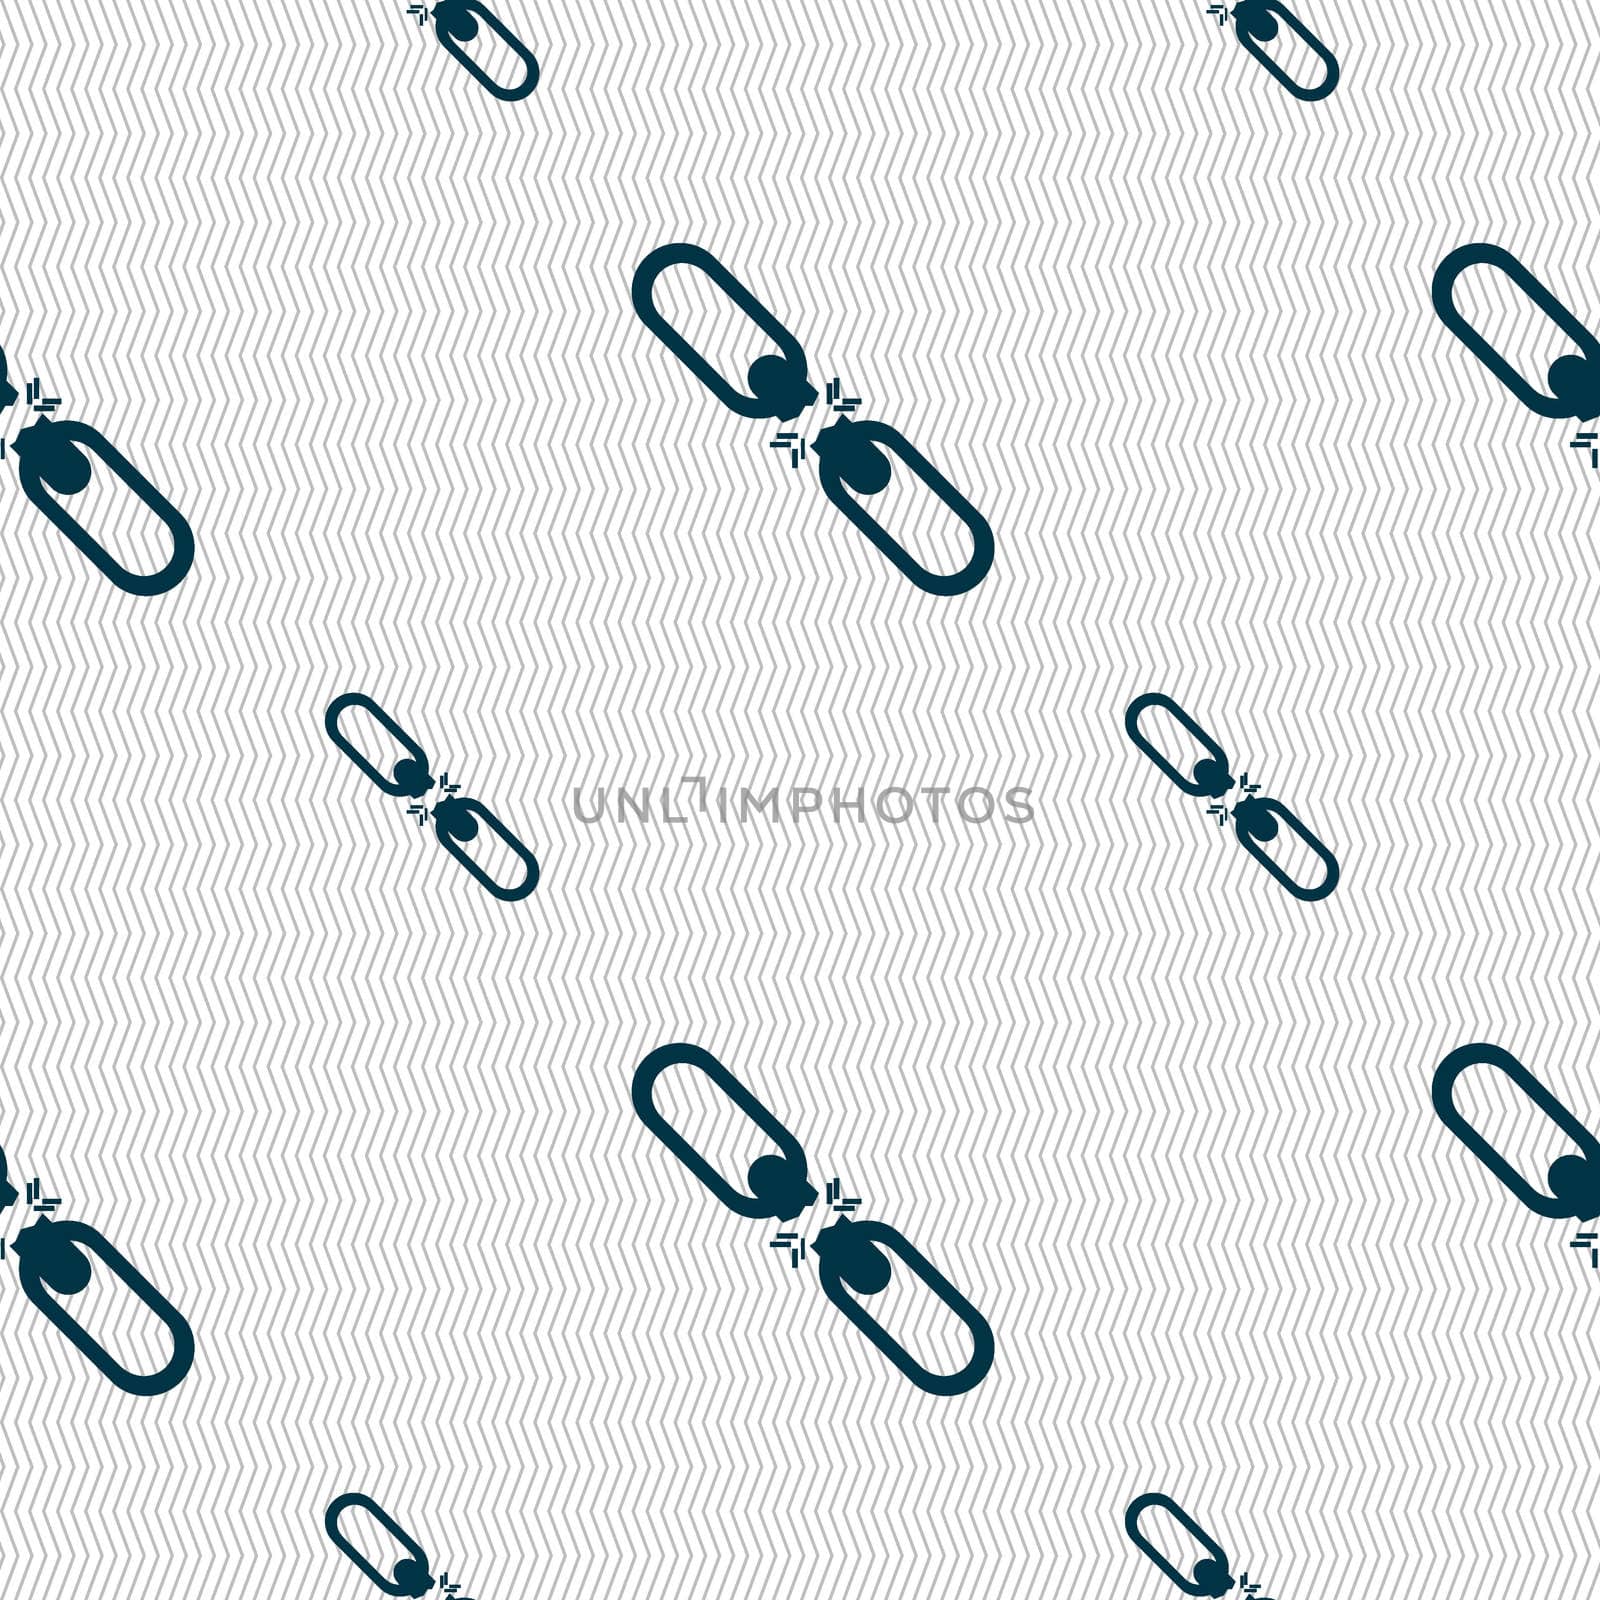 Broken connection flat single icon. Seamless pattern with geometric texture. illustration